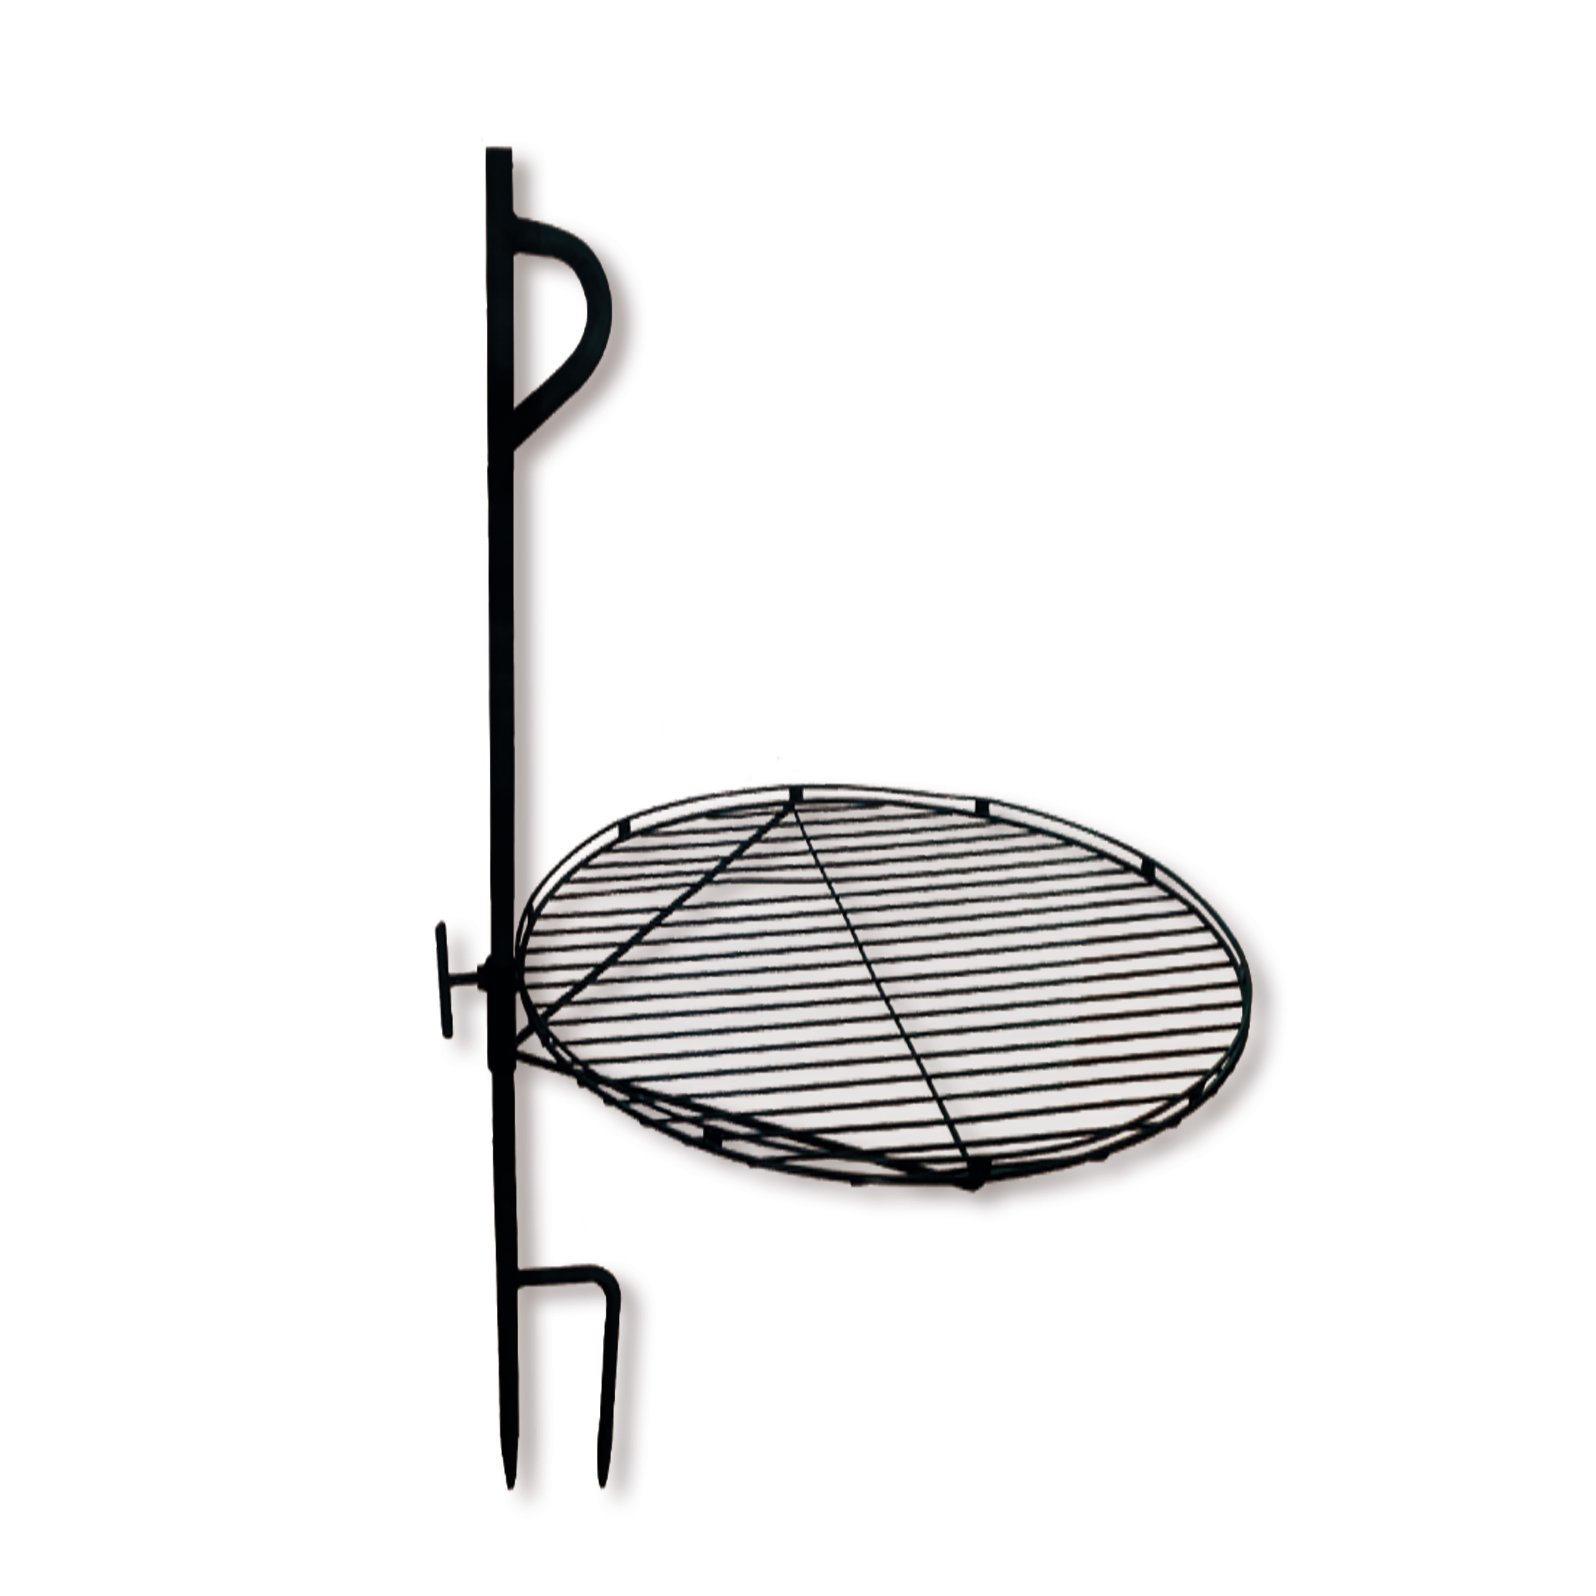 Backyard Expressions Swivel Campfire Grill Heavy Duty Steel Grate, Over Fire Camp Grill for Outdoor Open Flame Cooking - 913280